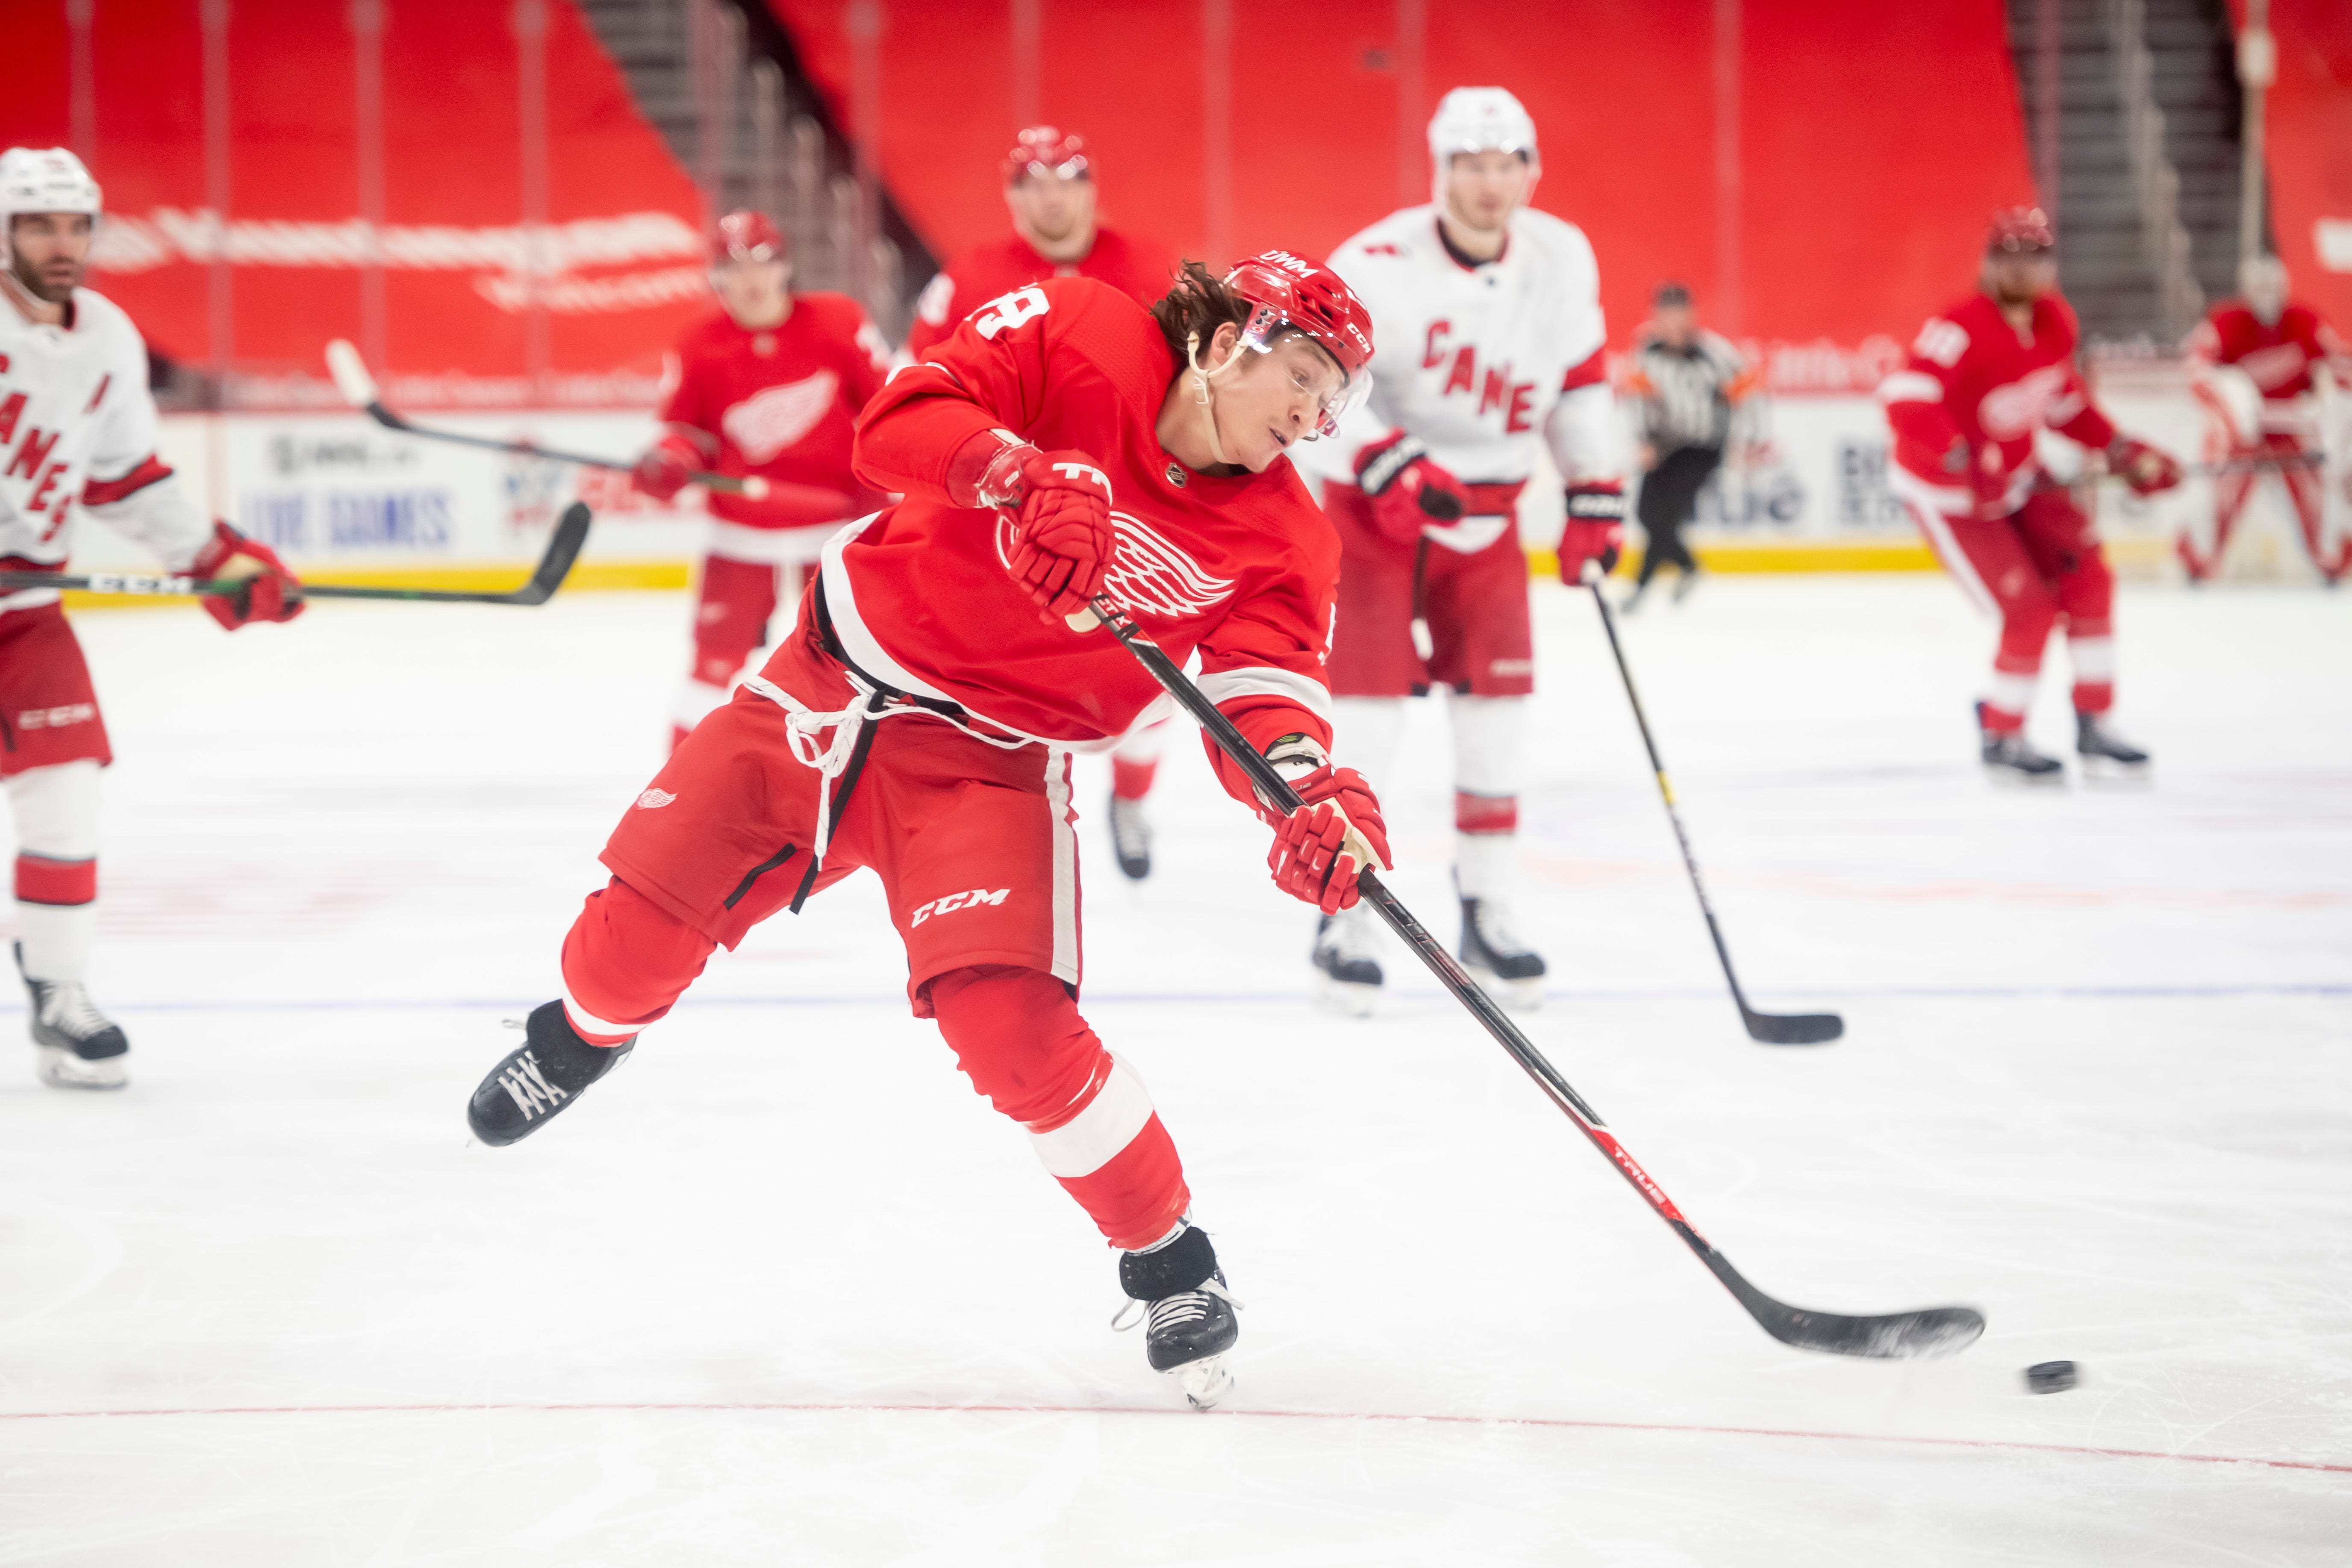 Detroit left wing Tyler Bertuzzi shoots the puck in the third period.